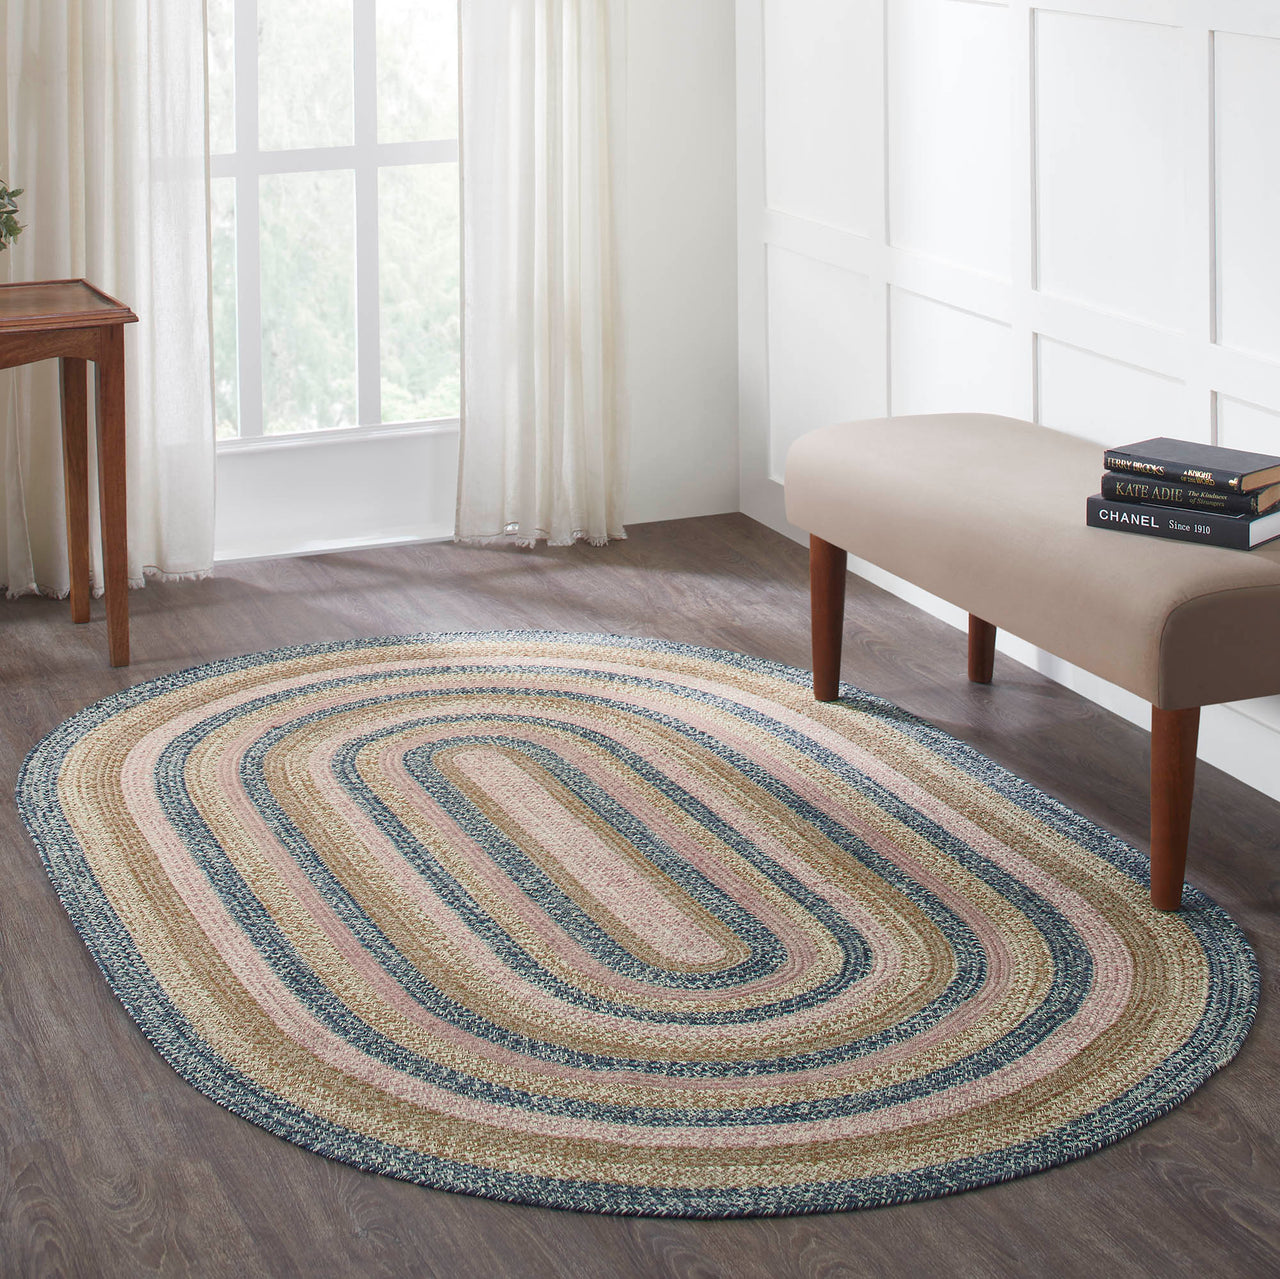 Kaila Jute Braided Rug Oval with Rug Pad 5'x8' VHC Brands – The Fox Decor